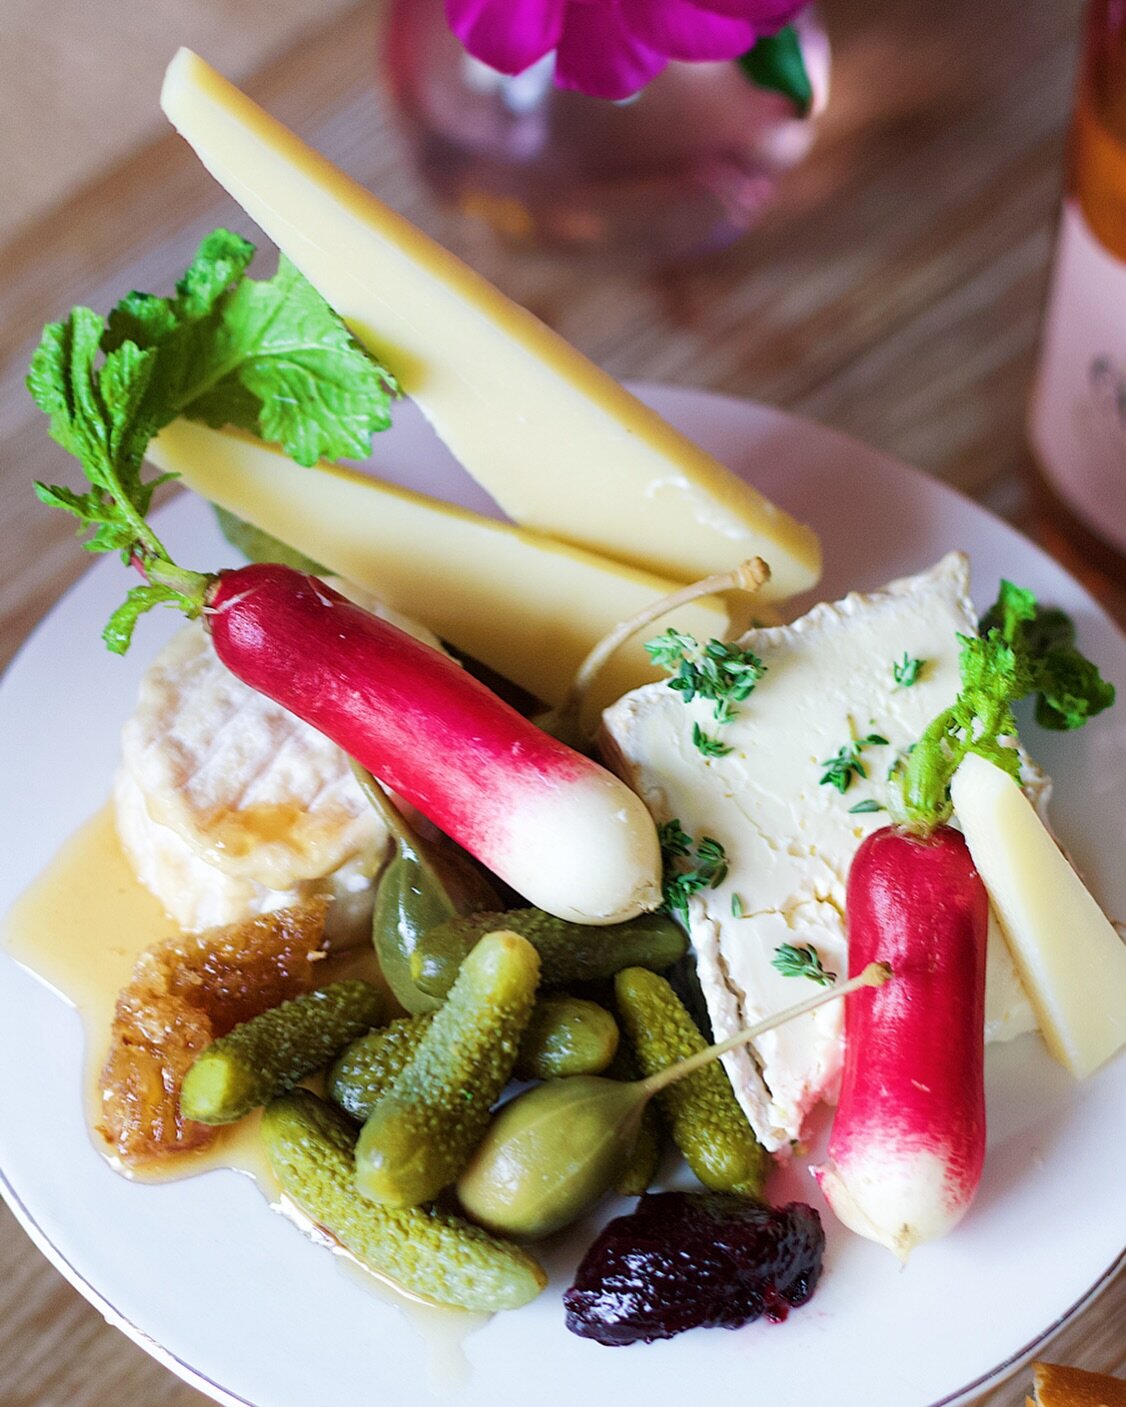 A little appreciation for cheese, a holiday food staple. This cheese board I made incorporates classic French flavors and cheeses with Comt&eacute;, D&eacute;lice, Crottin, cornichon, caper berries, honeycomb and French breakfast radish. I paired it 